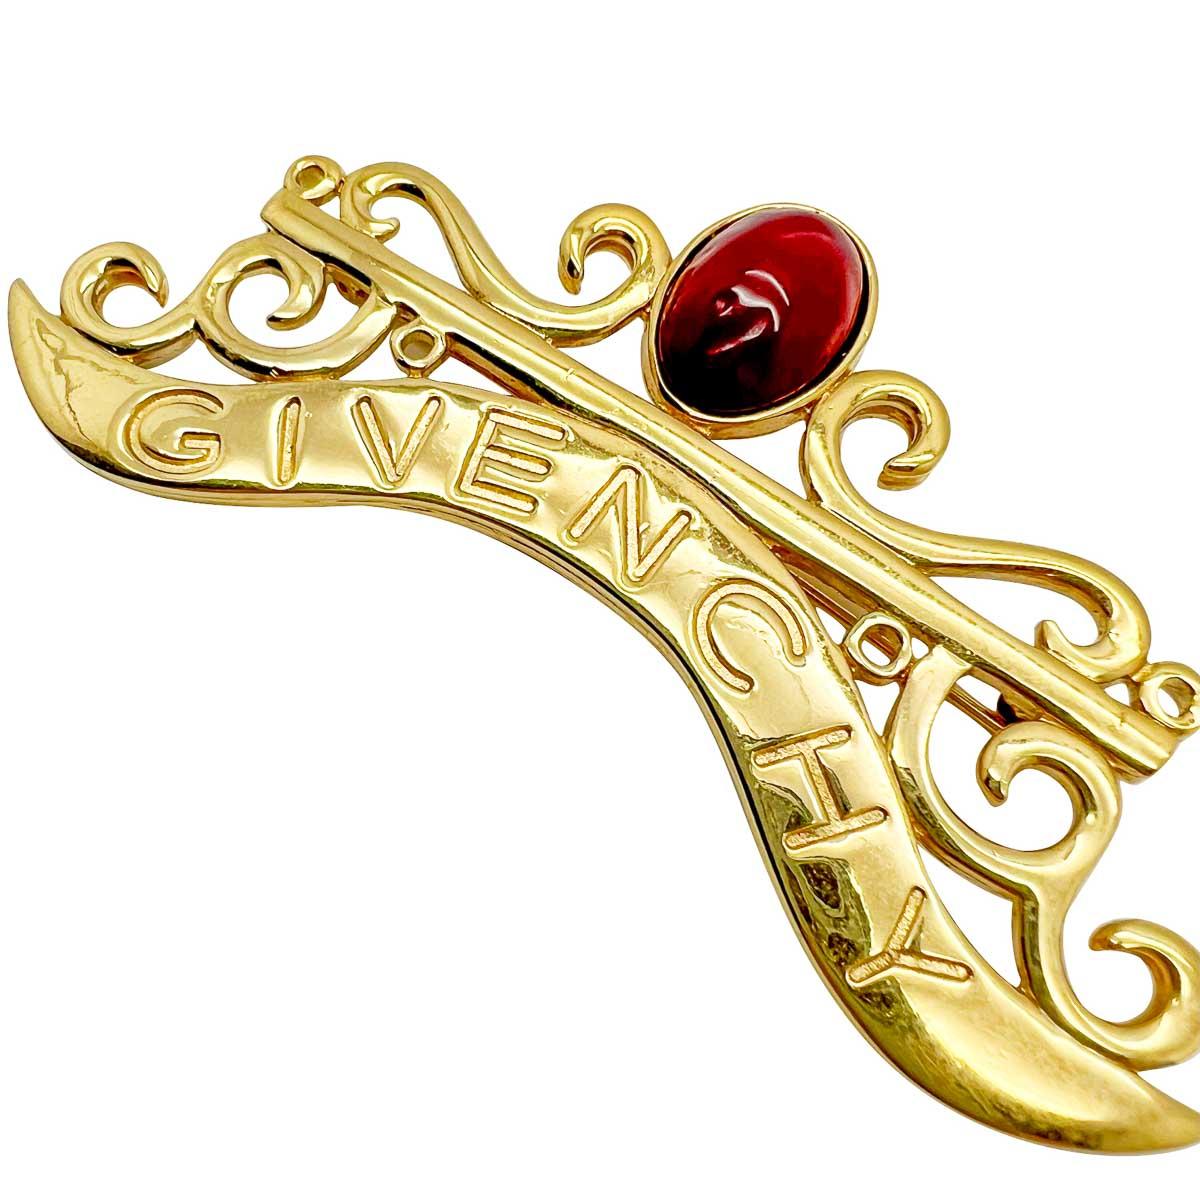 A Vintage Givenchy Cabochon Logo Brooch. What a fabulous find from the house of Givenchy. The scale is impressive and the lavish attention to detail ensures this one demands attention. Scrolls, cabochons and the world-famous moniker of the House